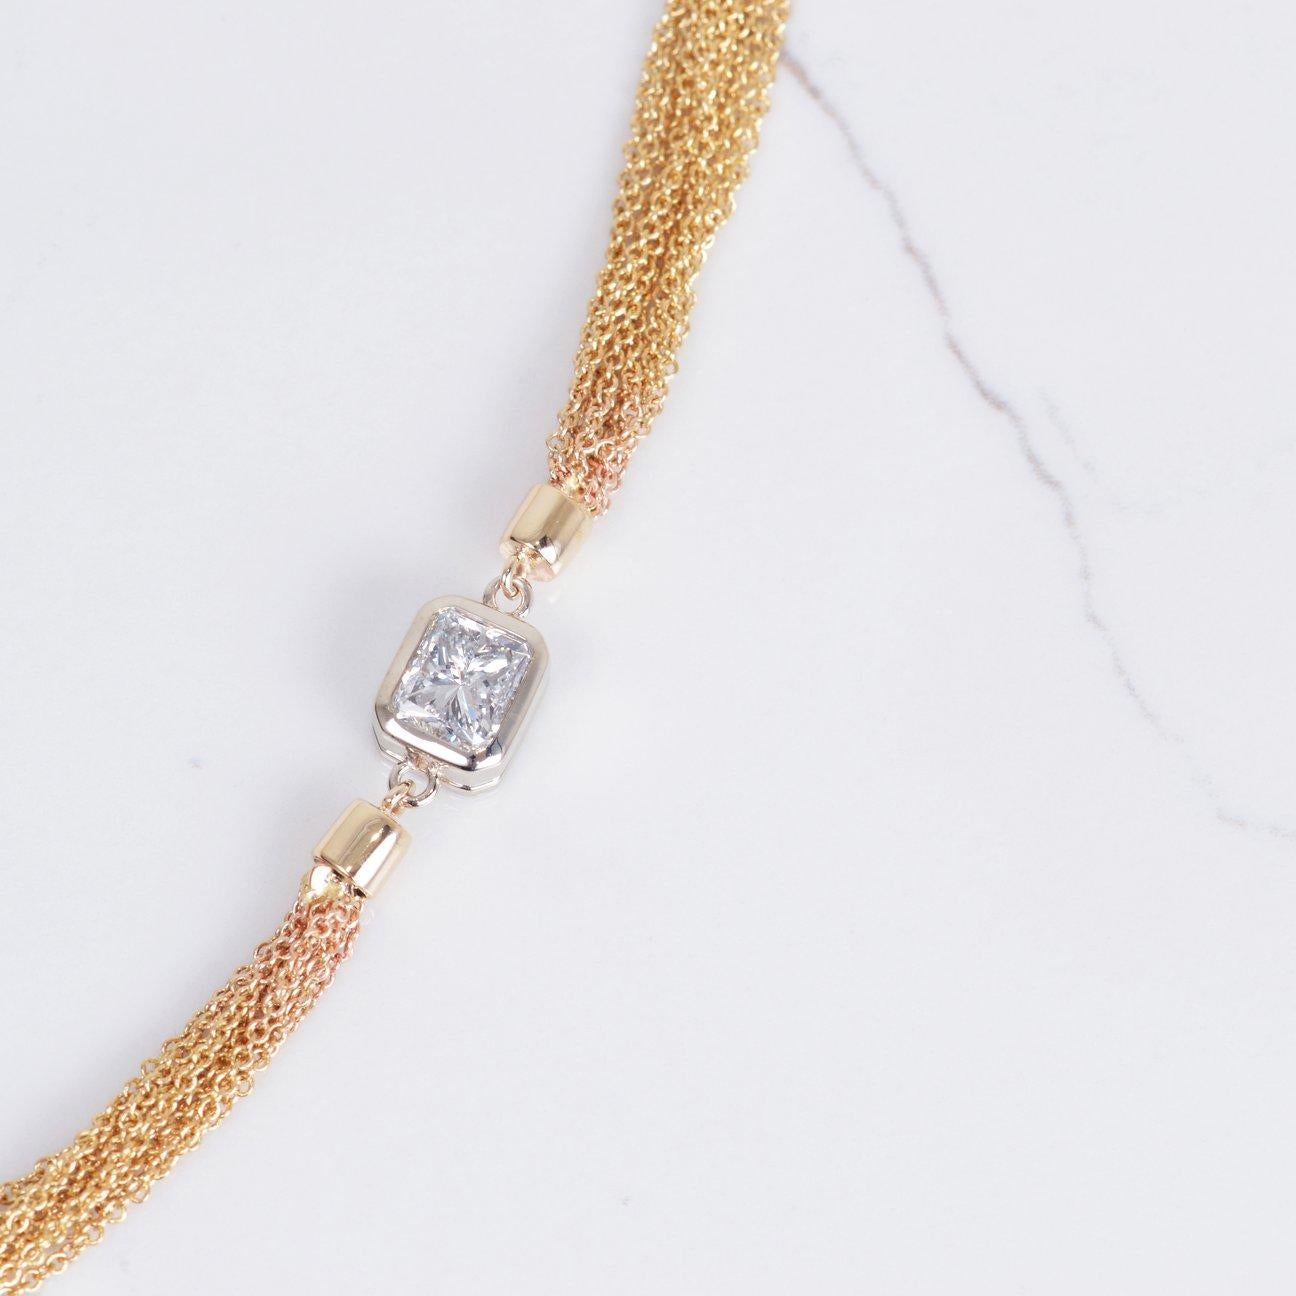 This necklace is a true statement piece! With a 1.07ct radiant cut diamond beautifully set off to the side in 14k white gold bezel and placed on a 14k yellow gold multiple chain necklace. Necklace weighs 14.2 grams and is 18in in length.